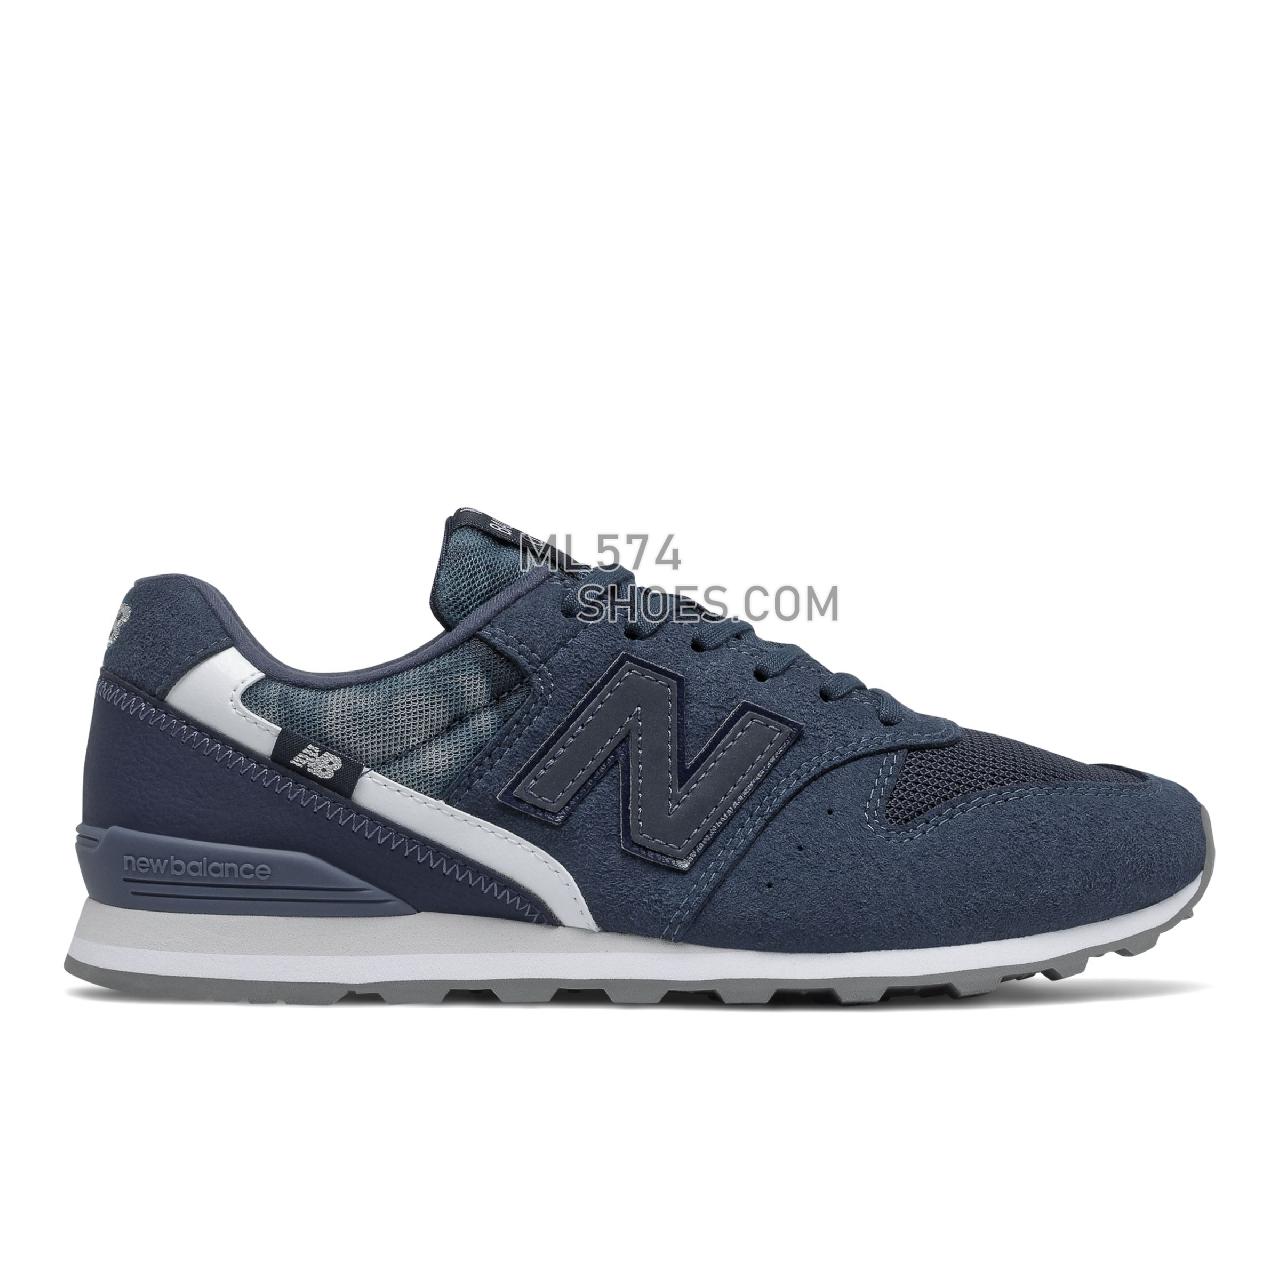 New Balance WL996v2 - Women's Classic Sneakers - Natural Indigo with White - WL996FPD